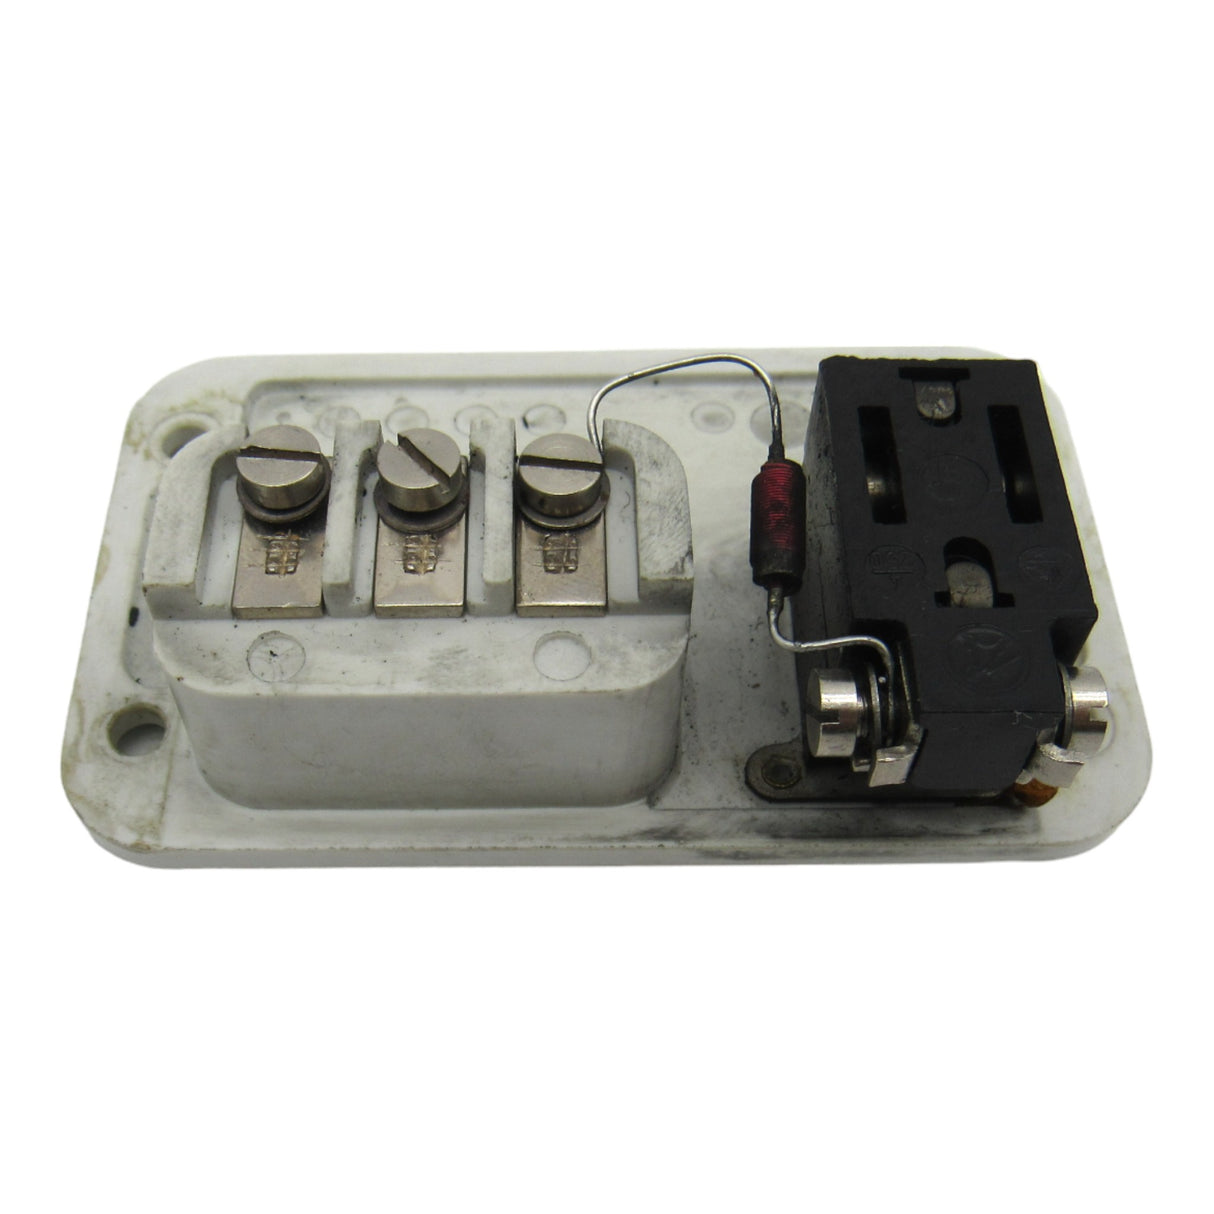 Power Switch and Receptacle for Elna Model 62 Sewing Machine